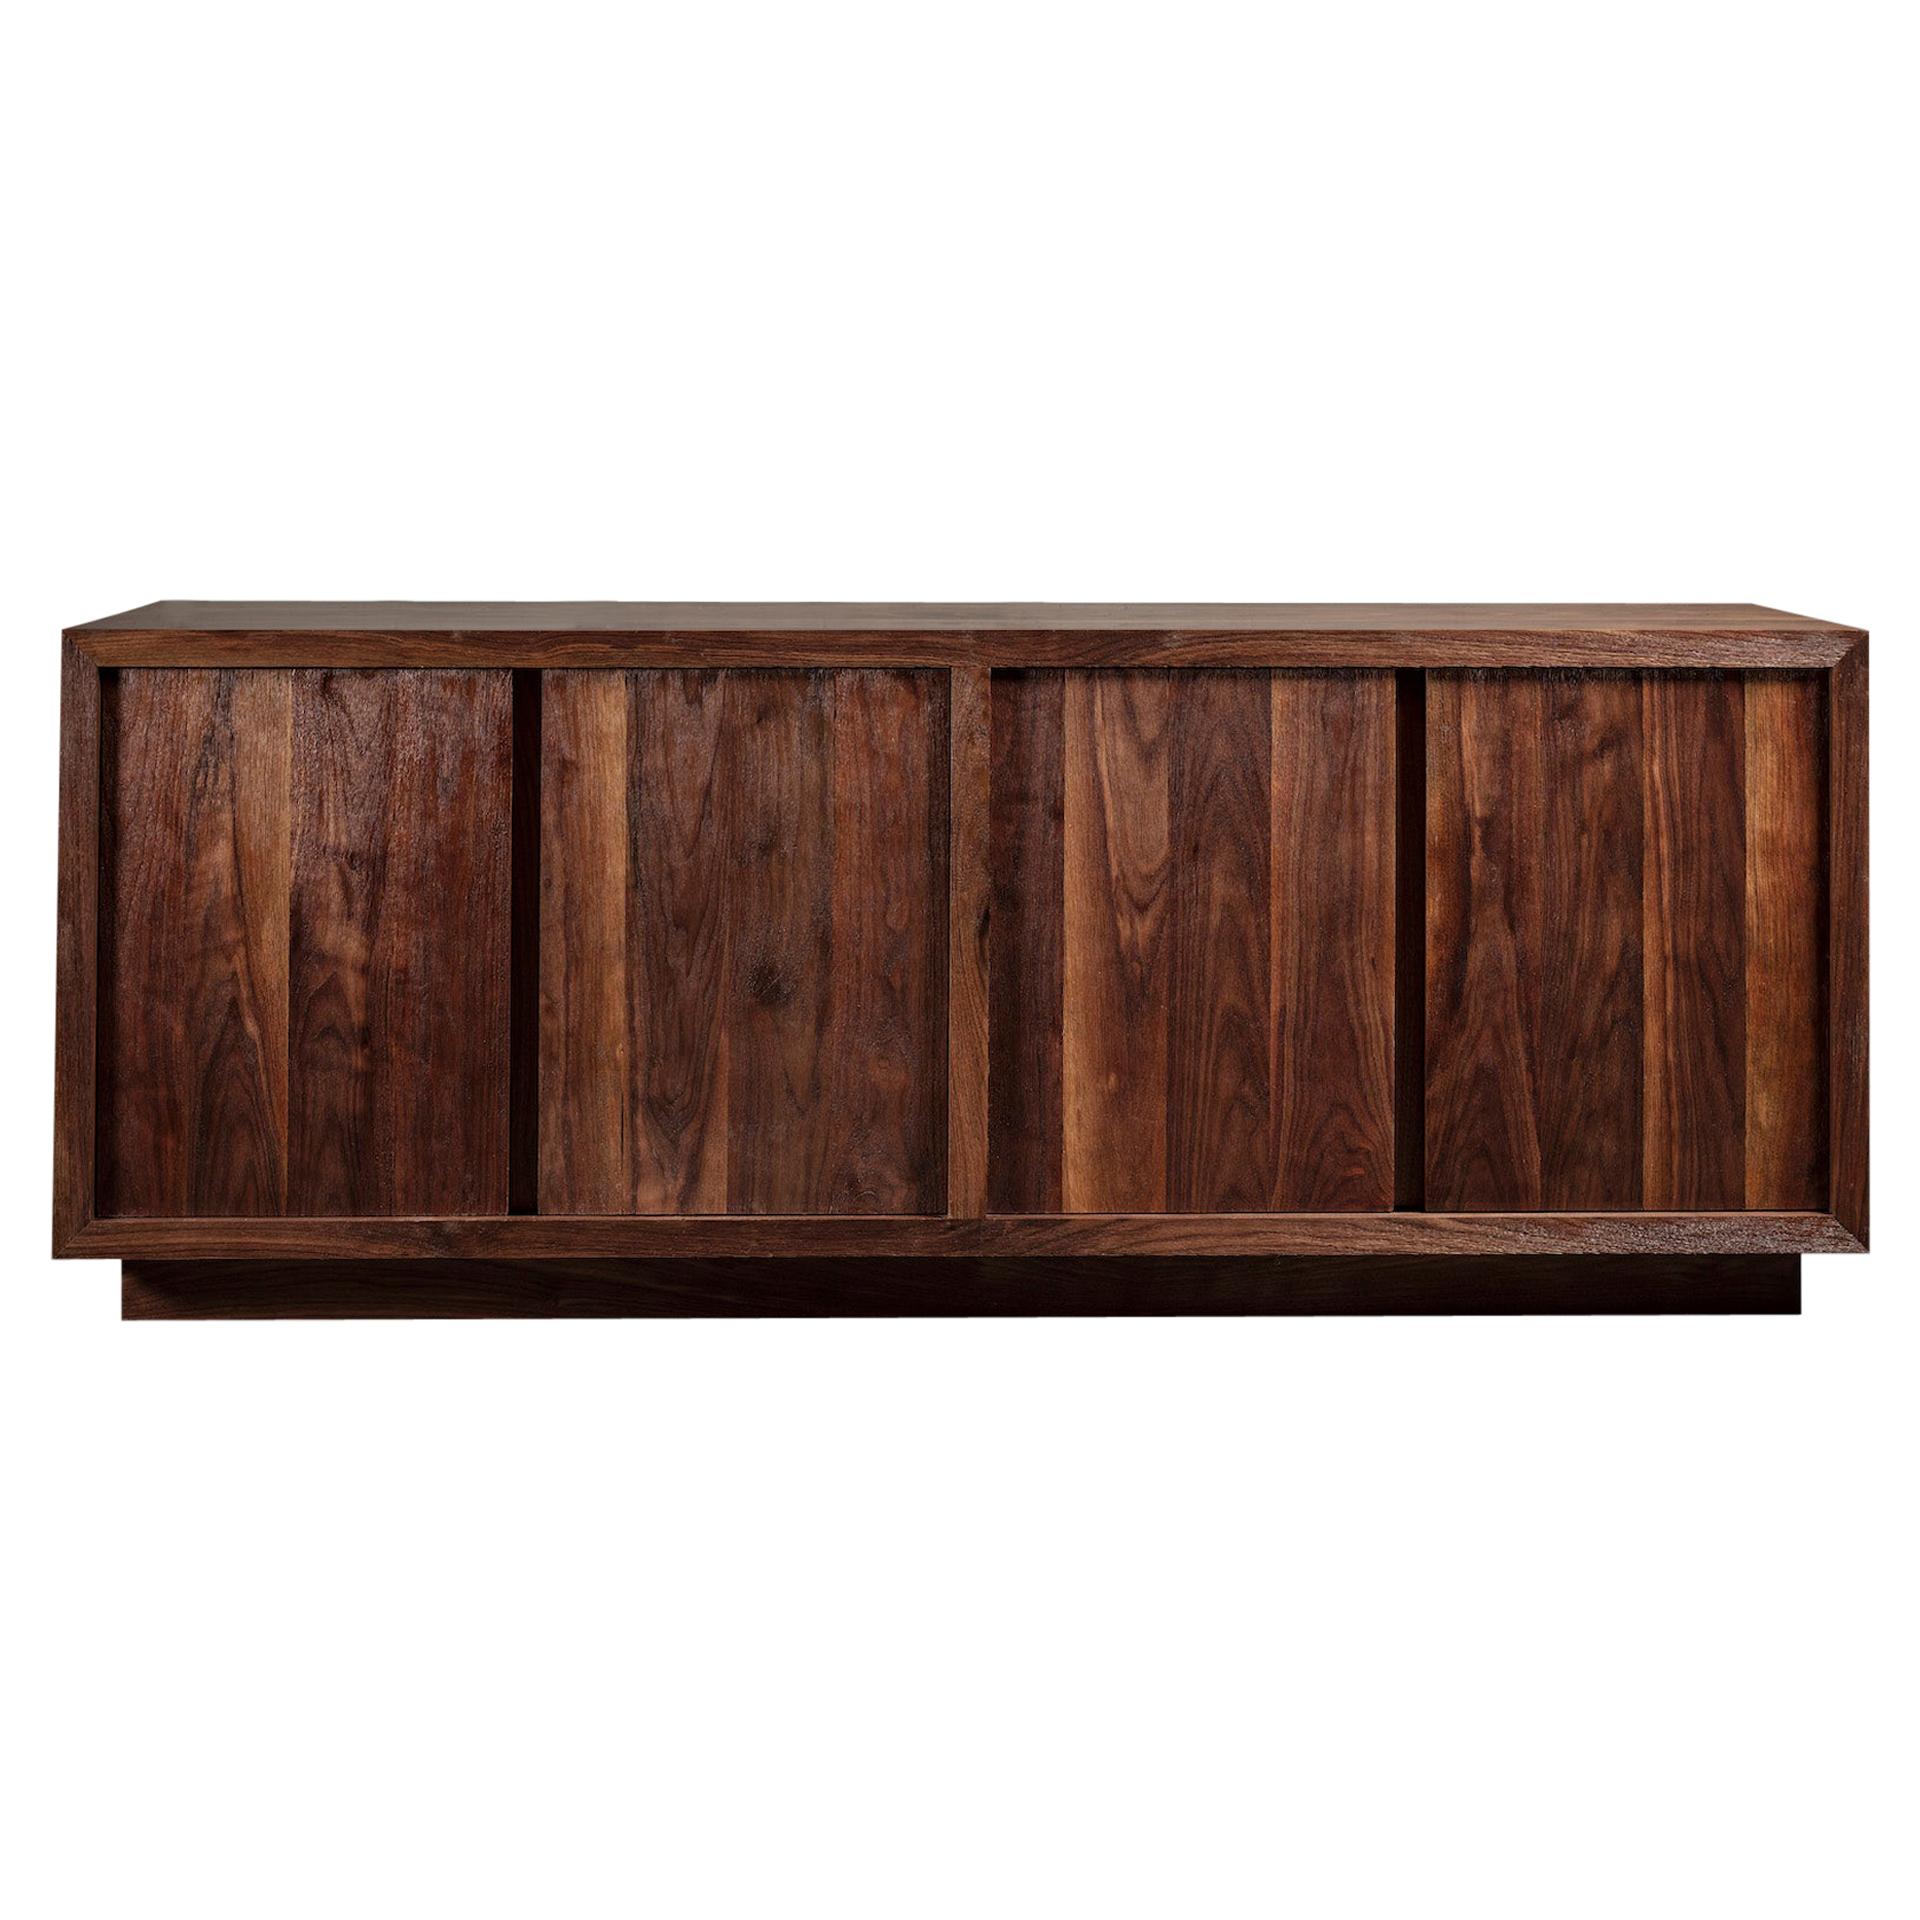 Natural Walnut Finish, Hand Crafted, Wood Graind and Textured Sideboard